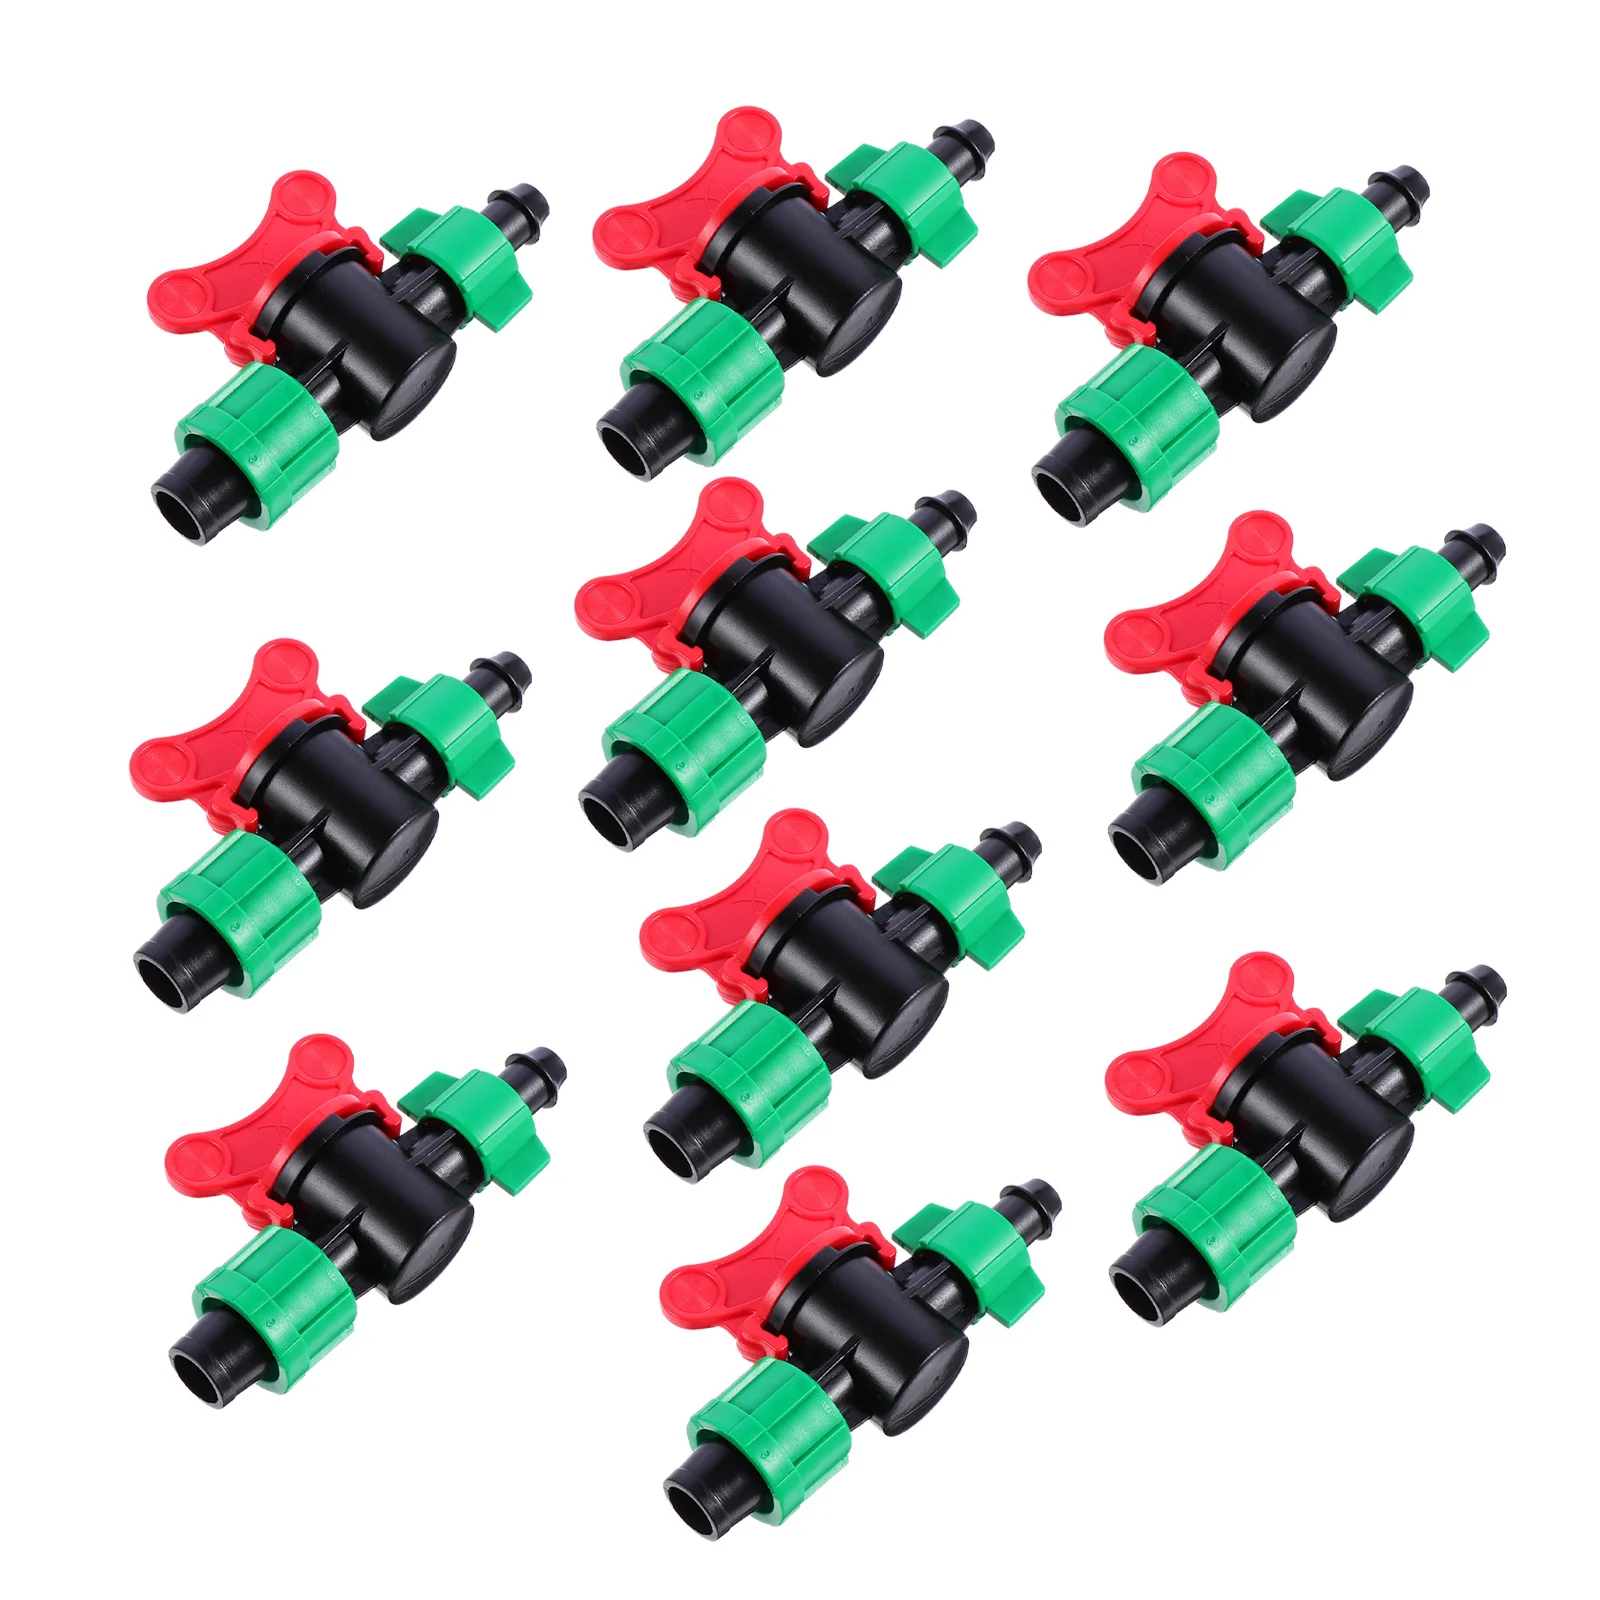 10 Pcs Green Accessories Automatic Watering Device Barbed Ball Valve Drip Irrigation System Sprinklers Watering Drippers